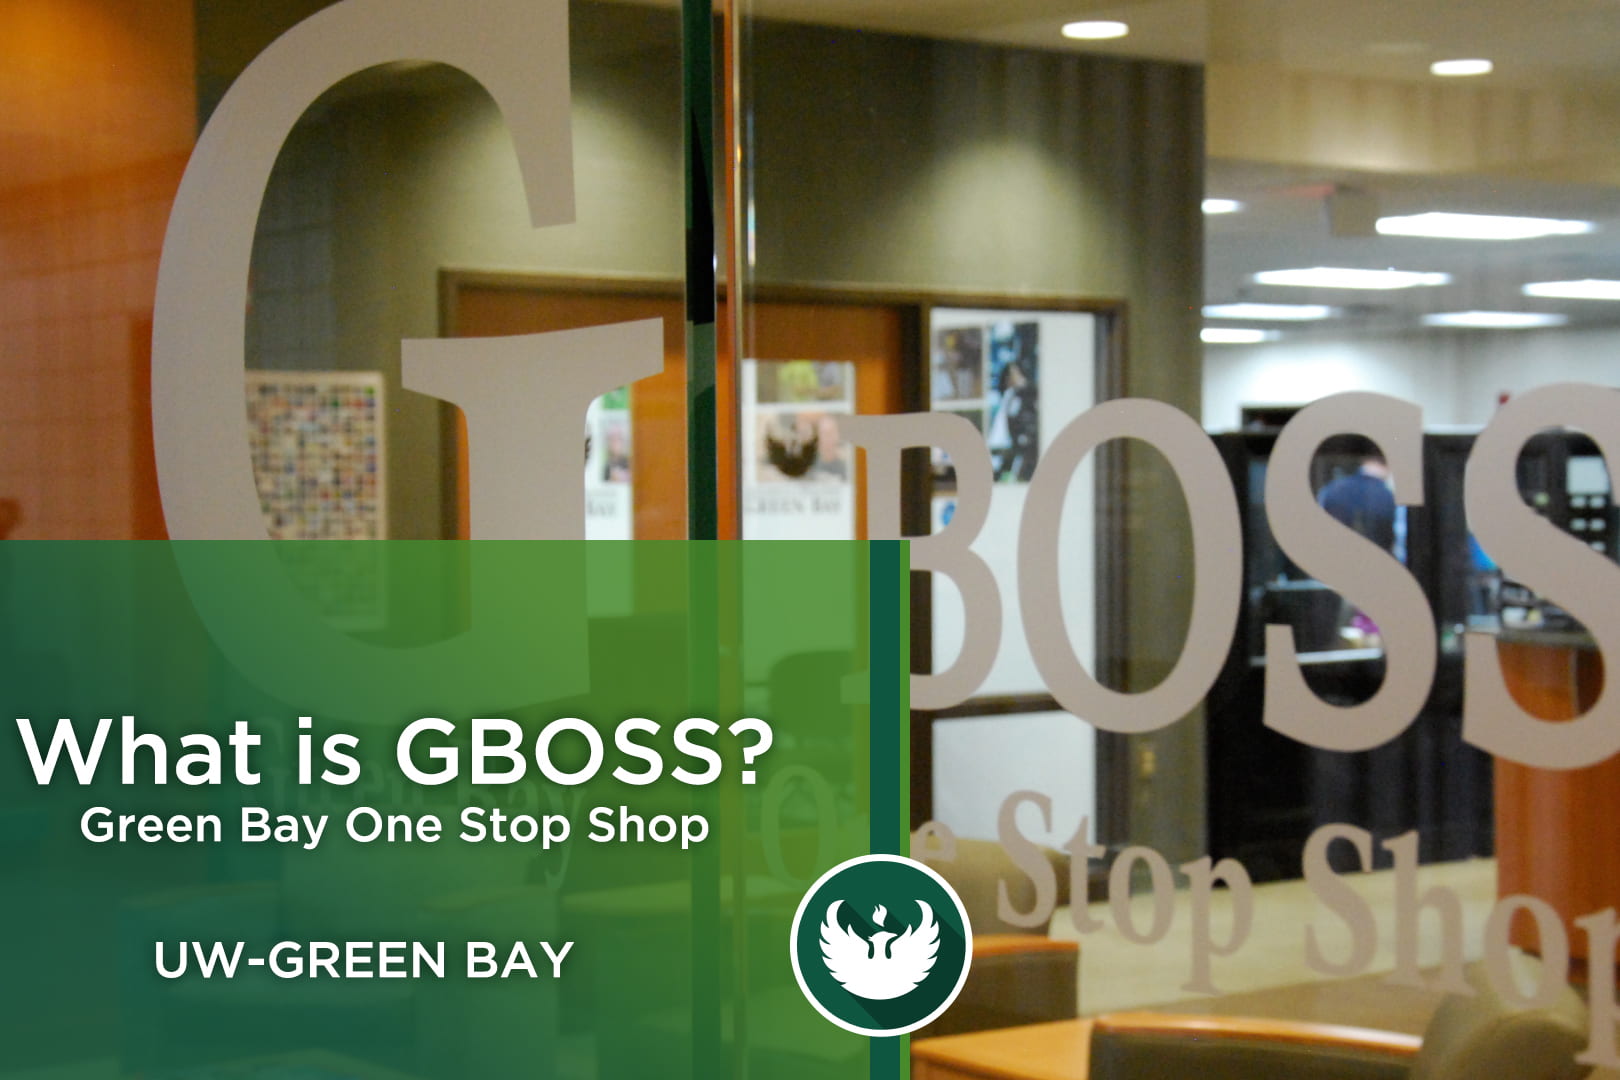 Photo of the front glass entrance to GBOSS or “Green Bay One Stop Shop."